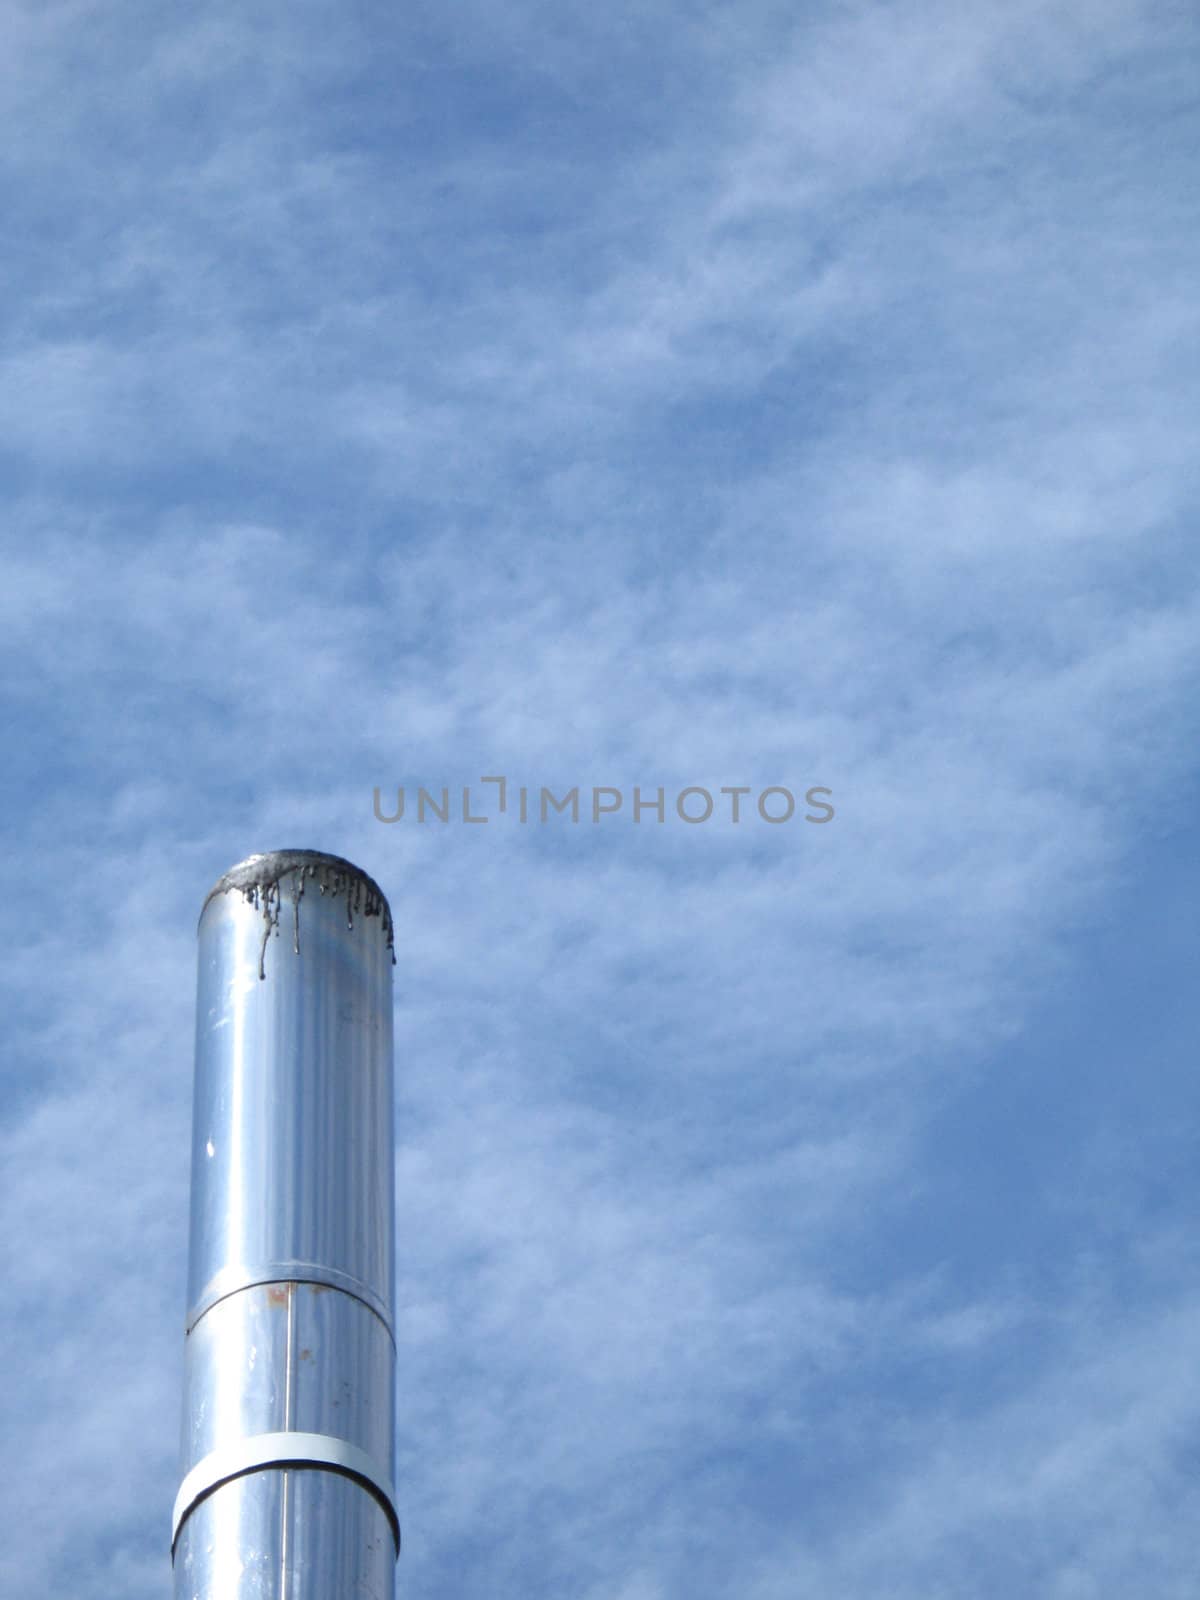 silver chimney in the blue sky